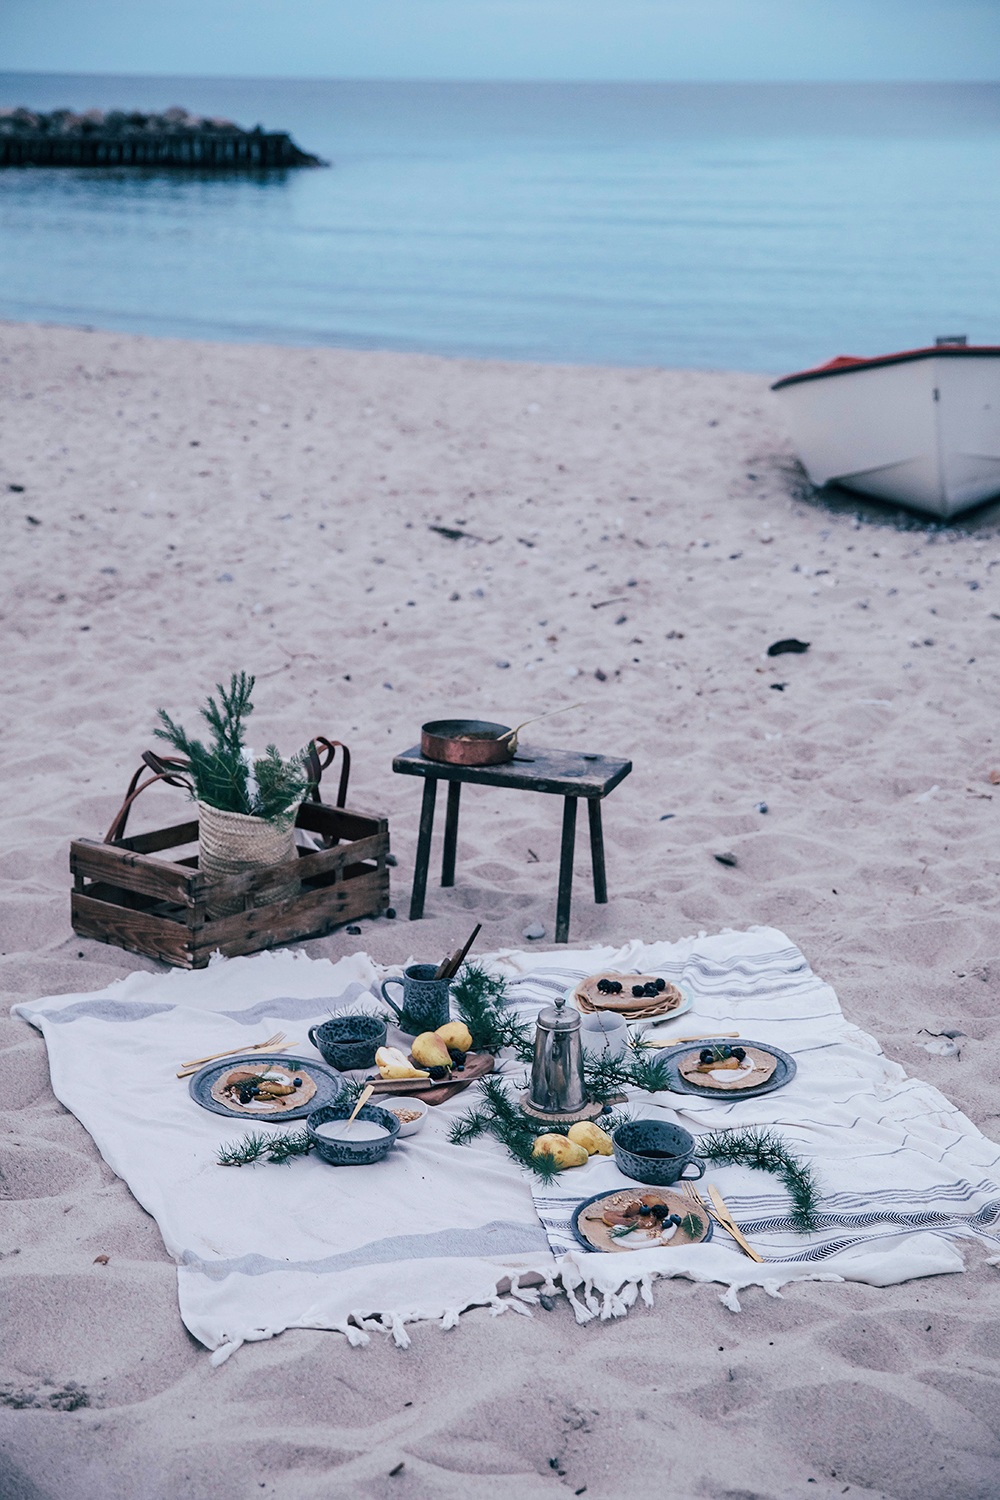 A beach picnic in Denmark – gluten-free Crêpes with caramelized pears